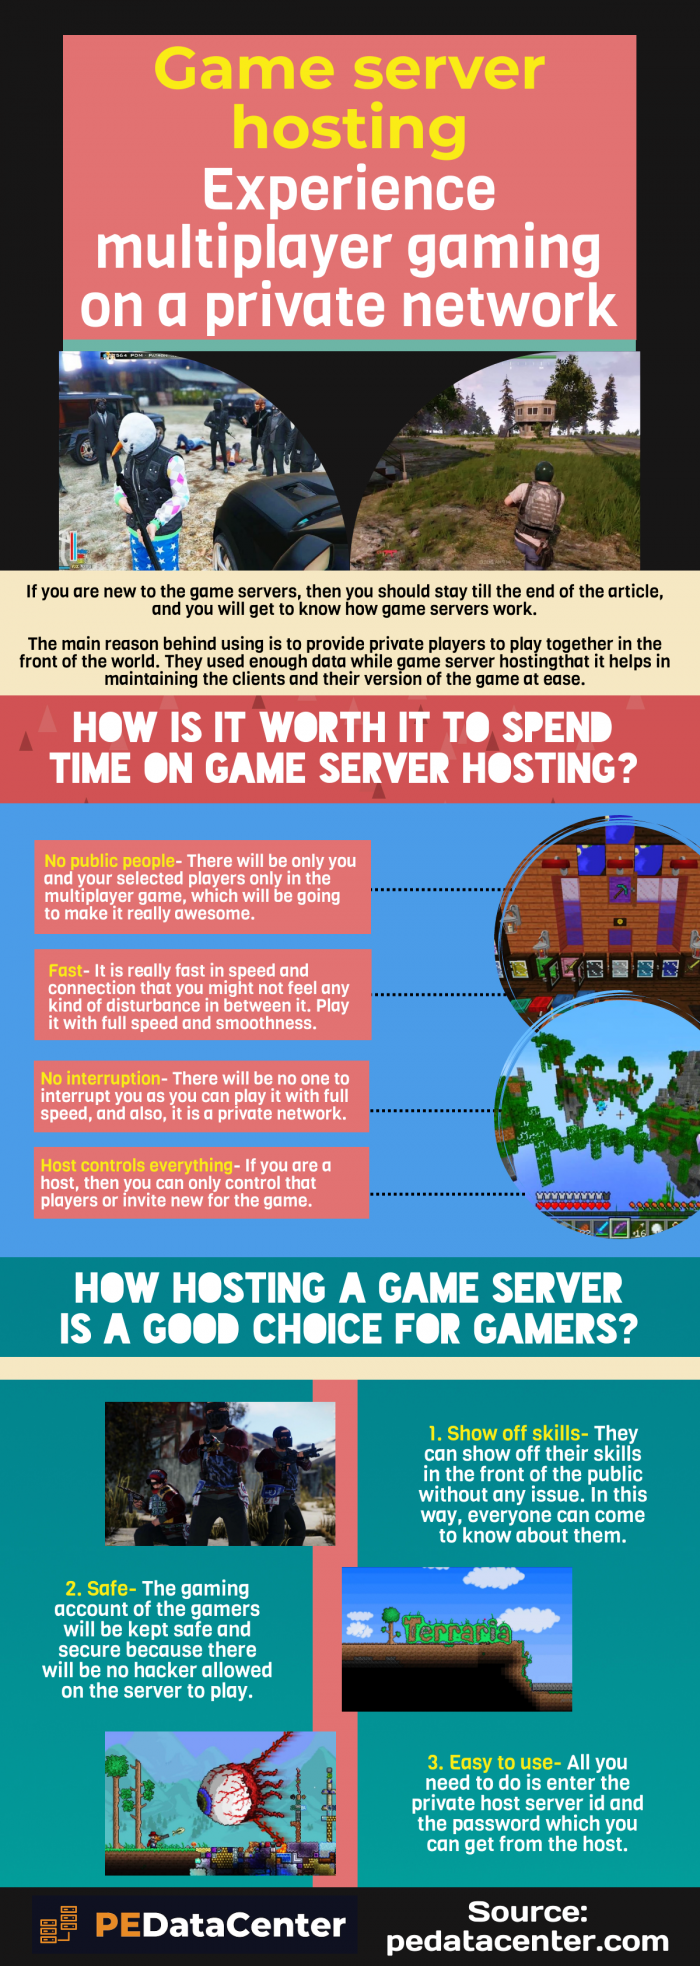 Game server hosting-Letting gamers show their skills